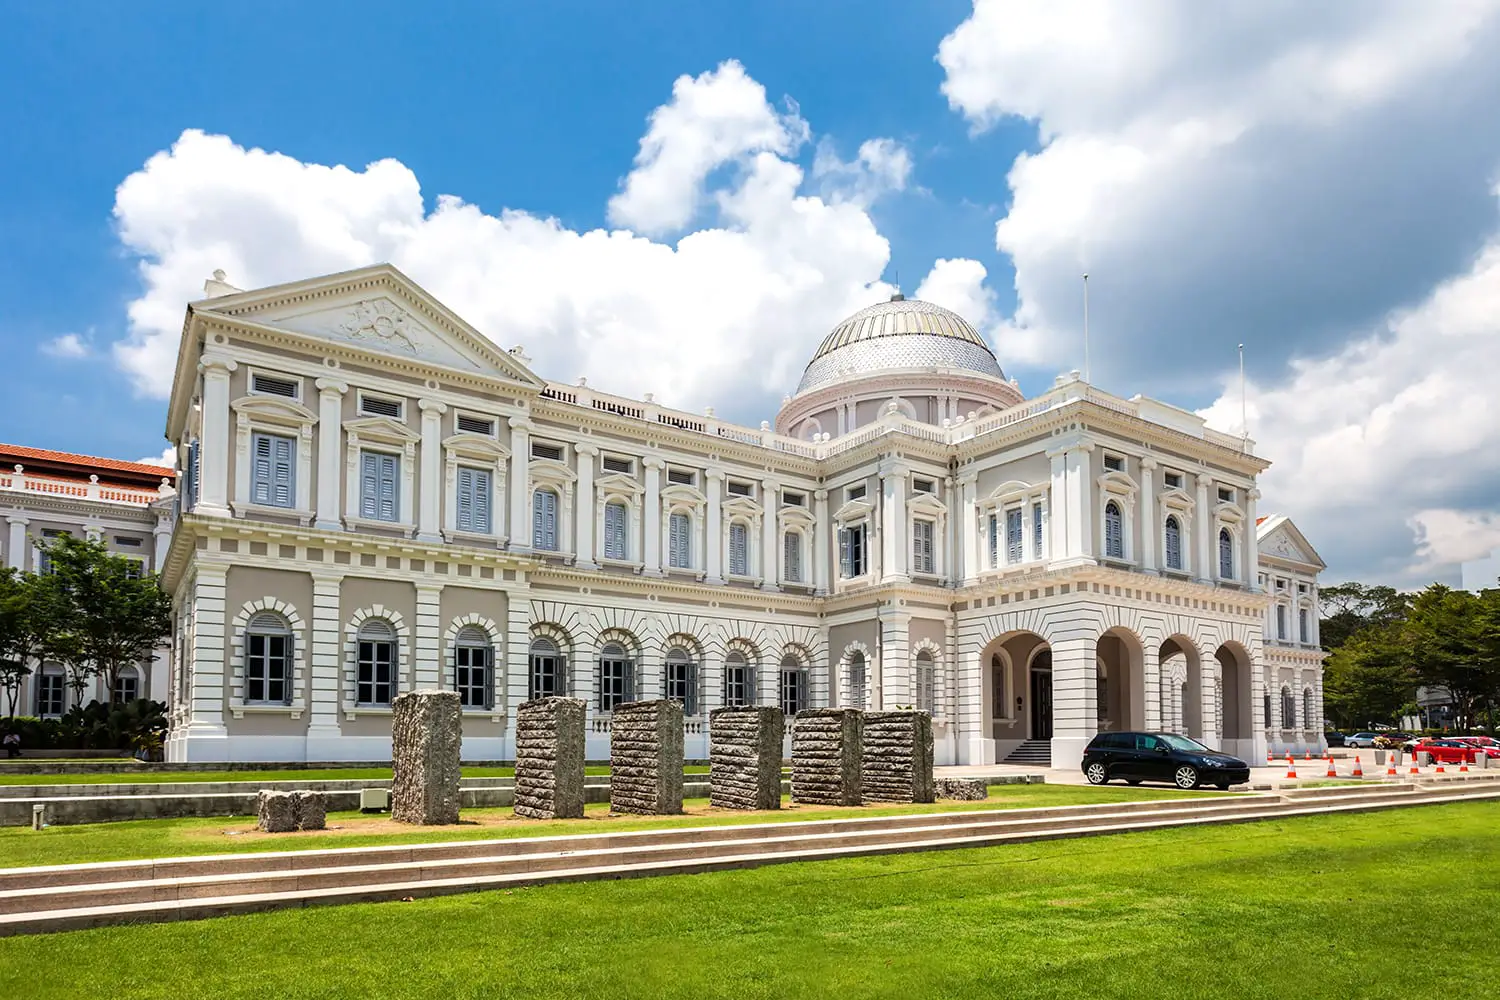 The National Museum of Singapore is a national museum in Singapore and the oldest museum in Singapore.